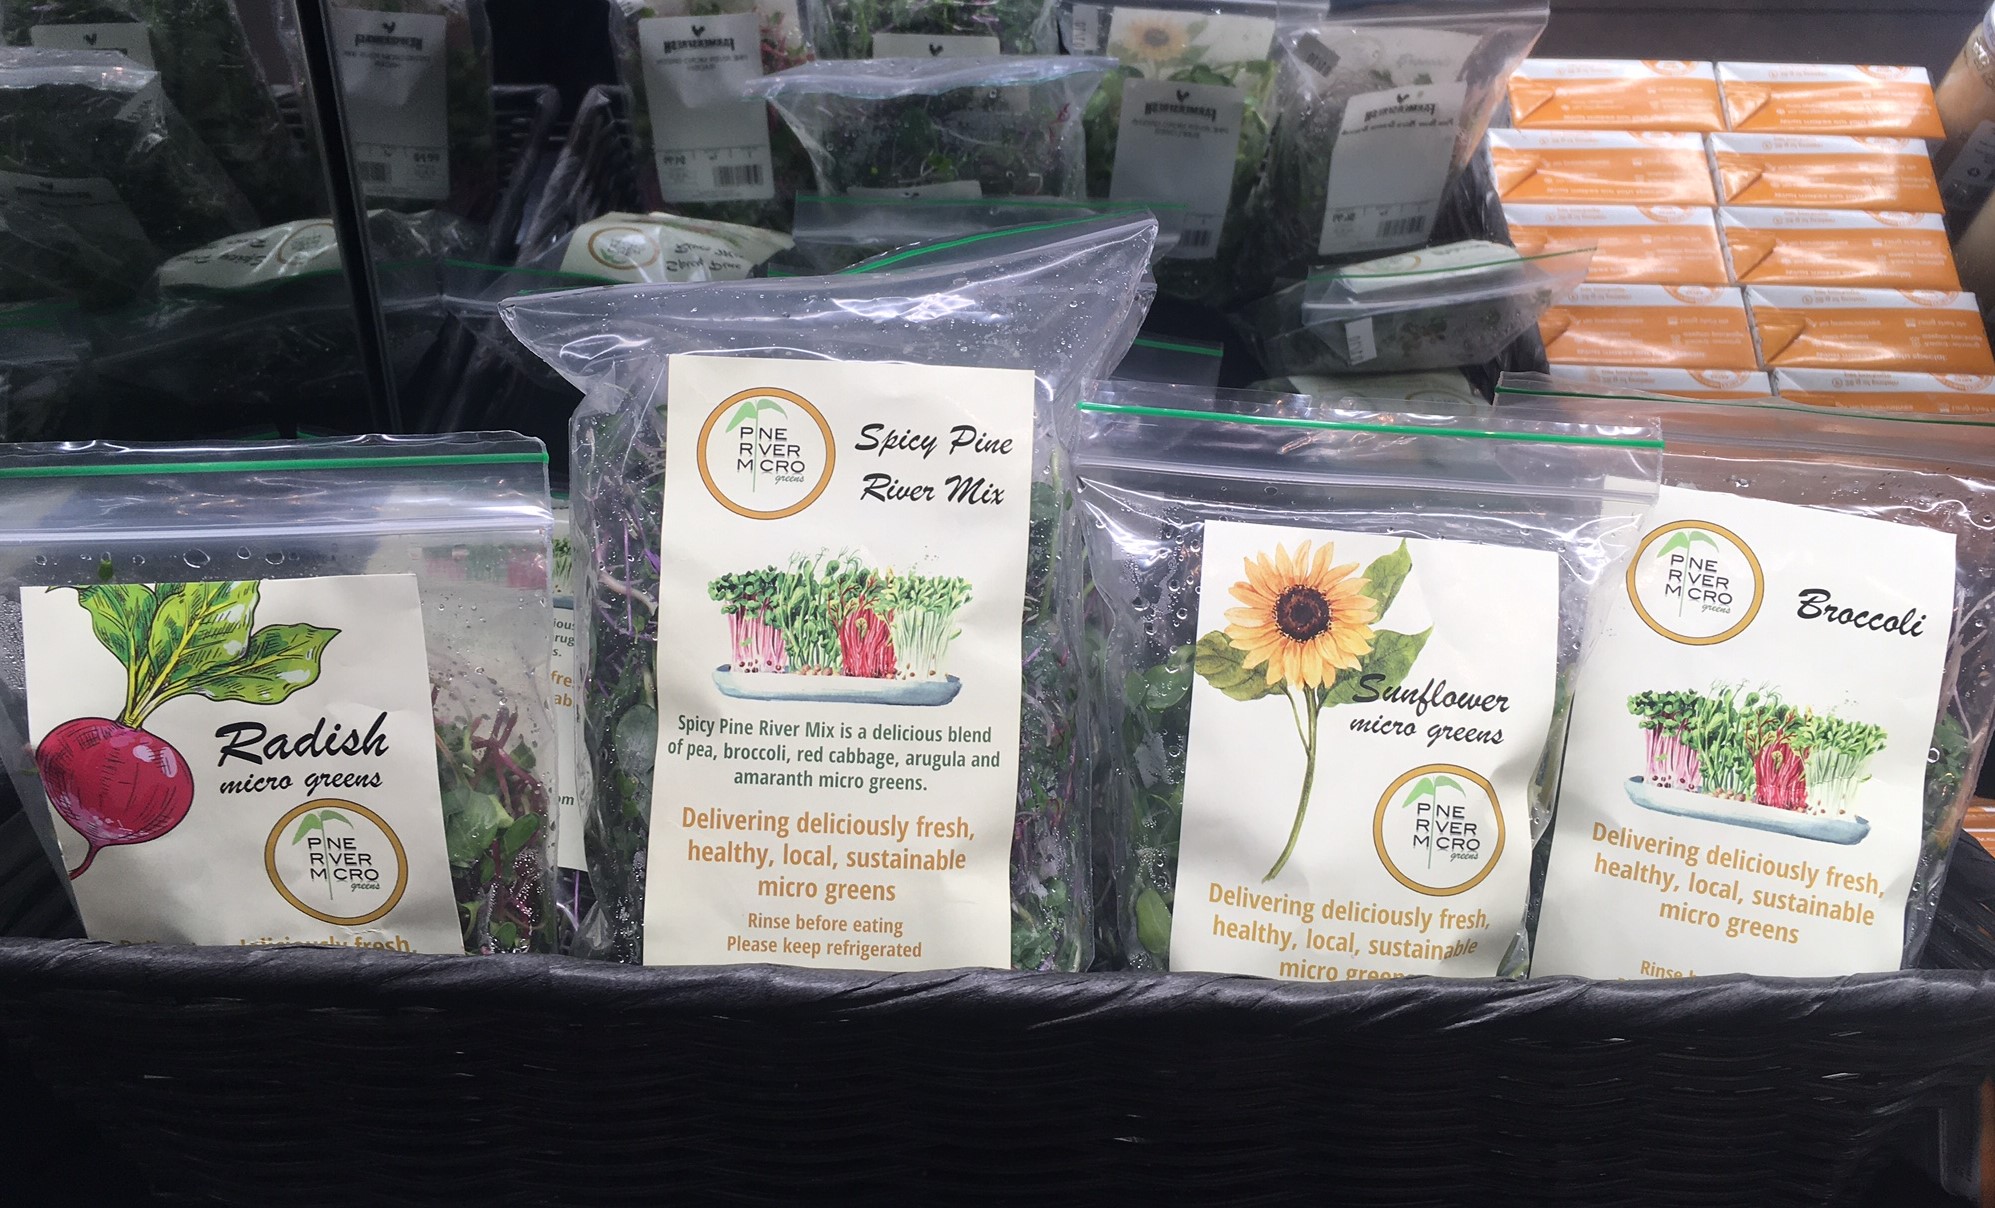 Local Product Highlight: Pine River Microgreens